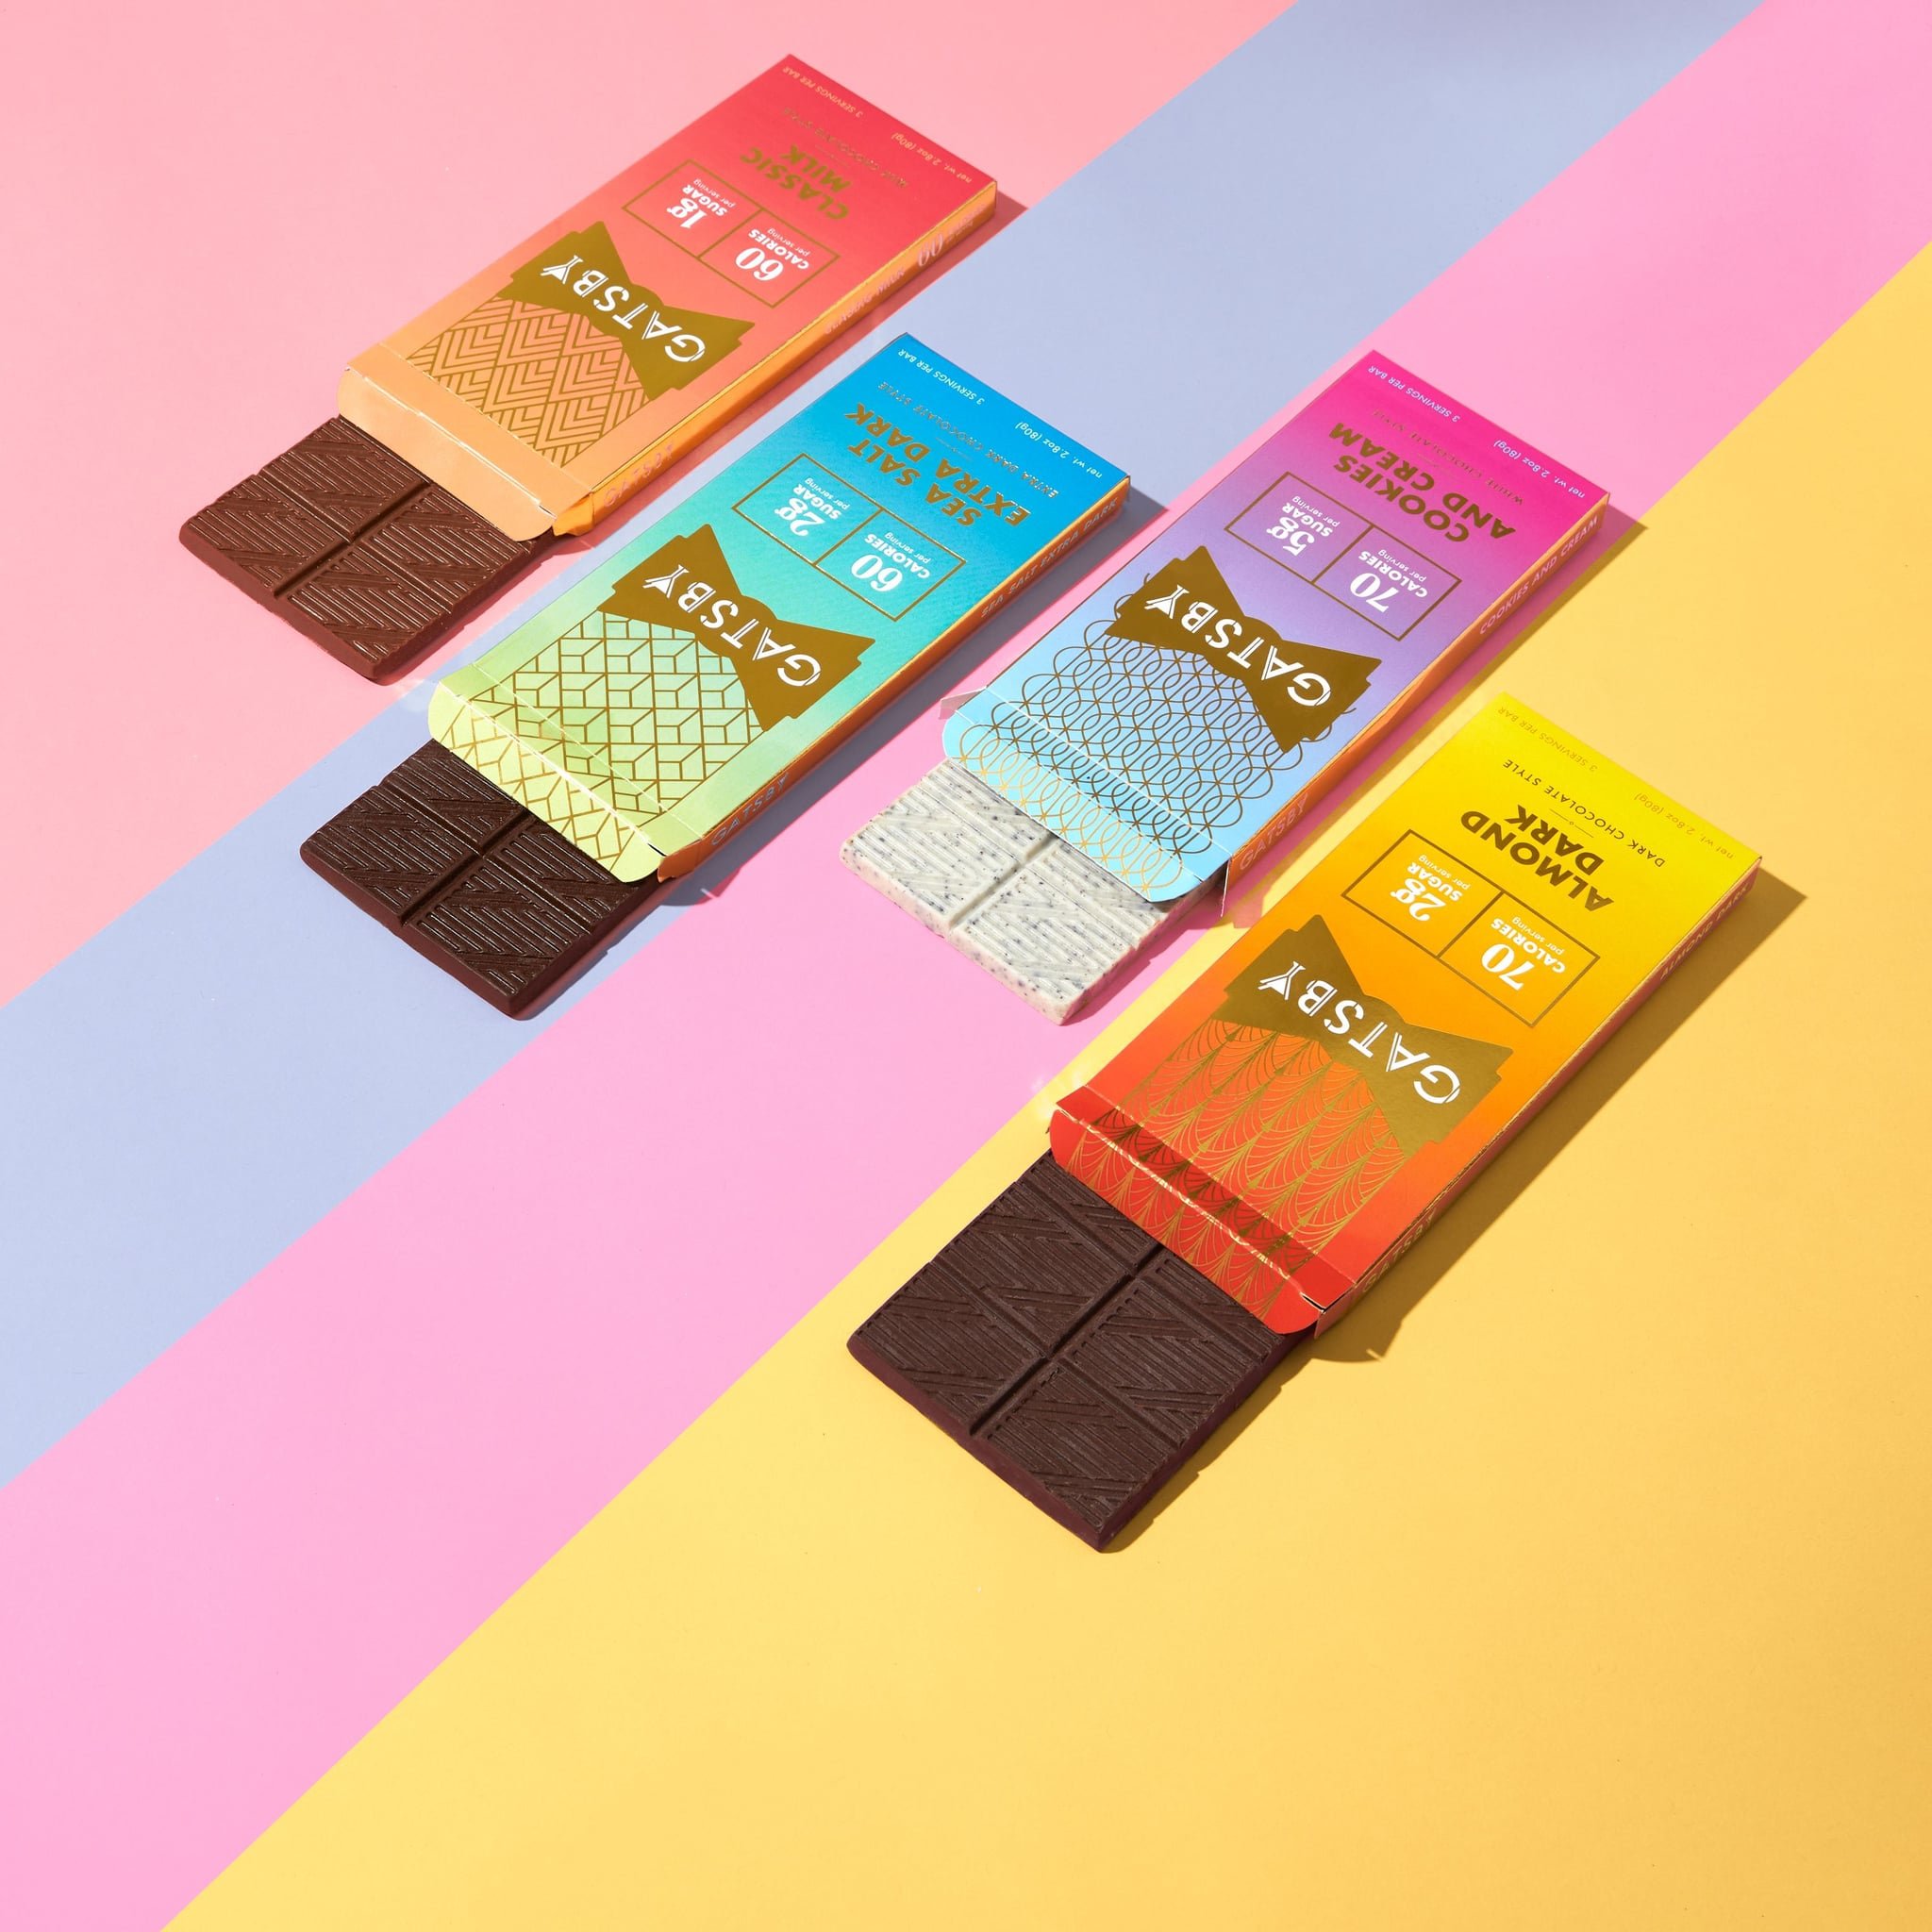 I Taste-Tested This New Low-Cal Chocolate, and Wow, It Did Not Disappoint